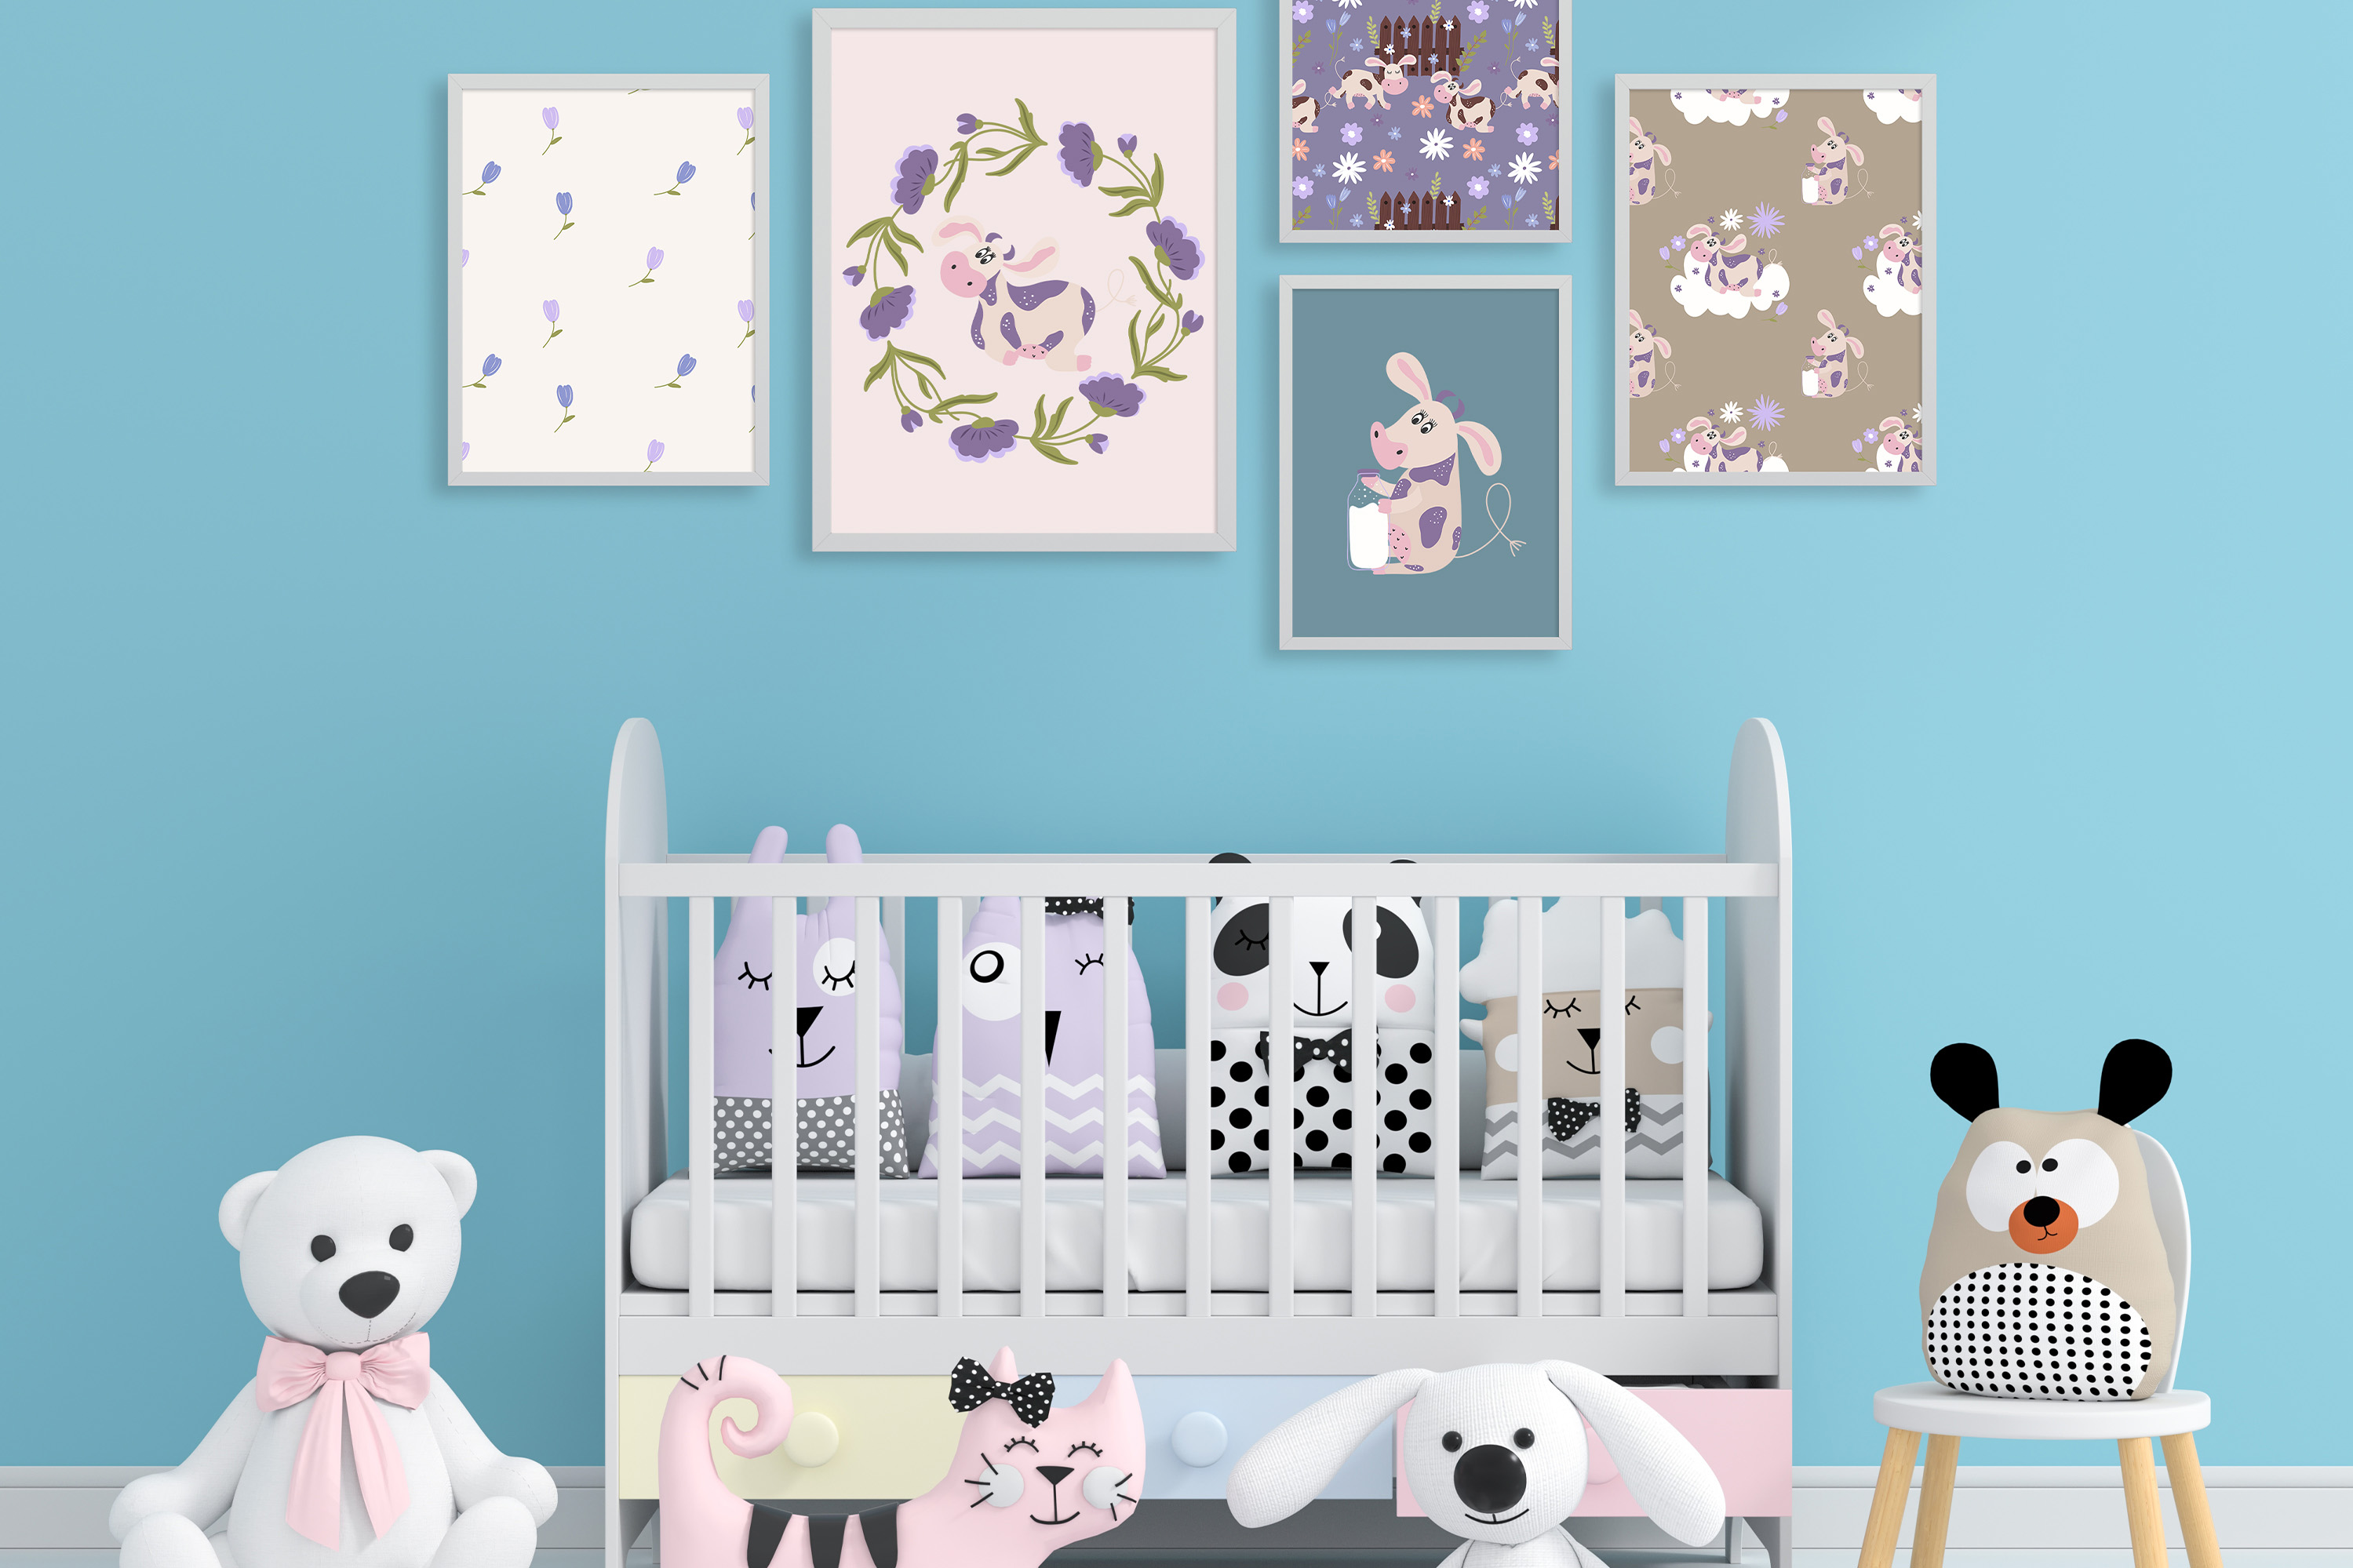 Milky Cows Cute Illustrations in home decor.